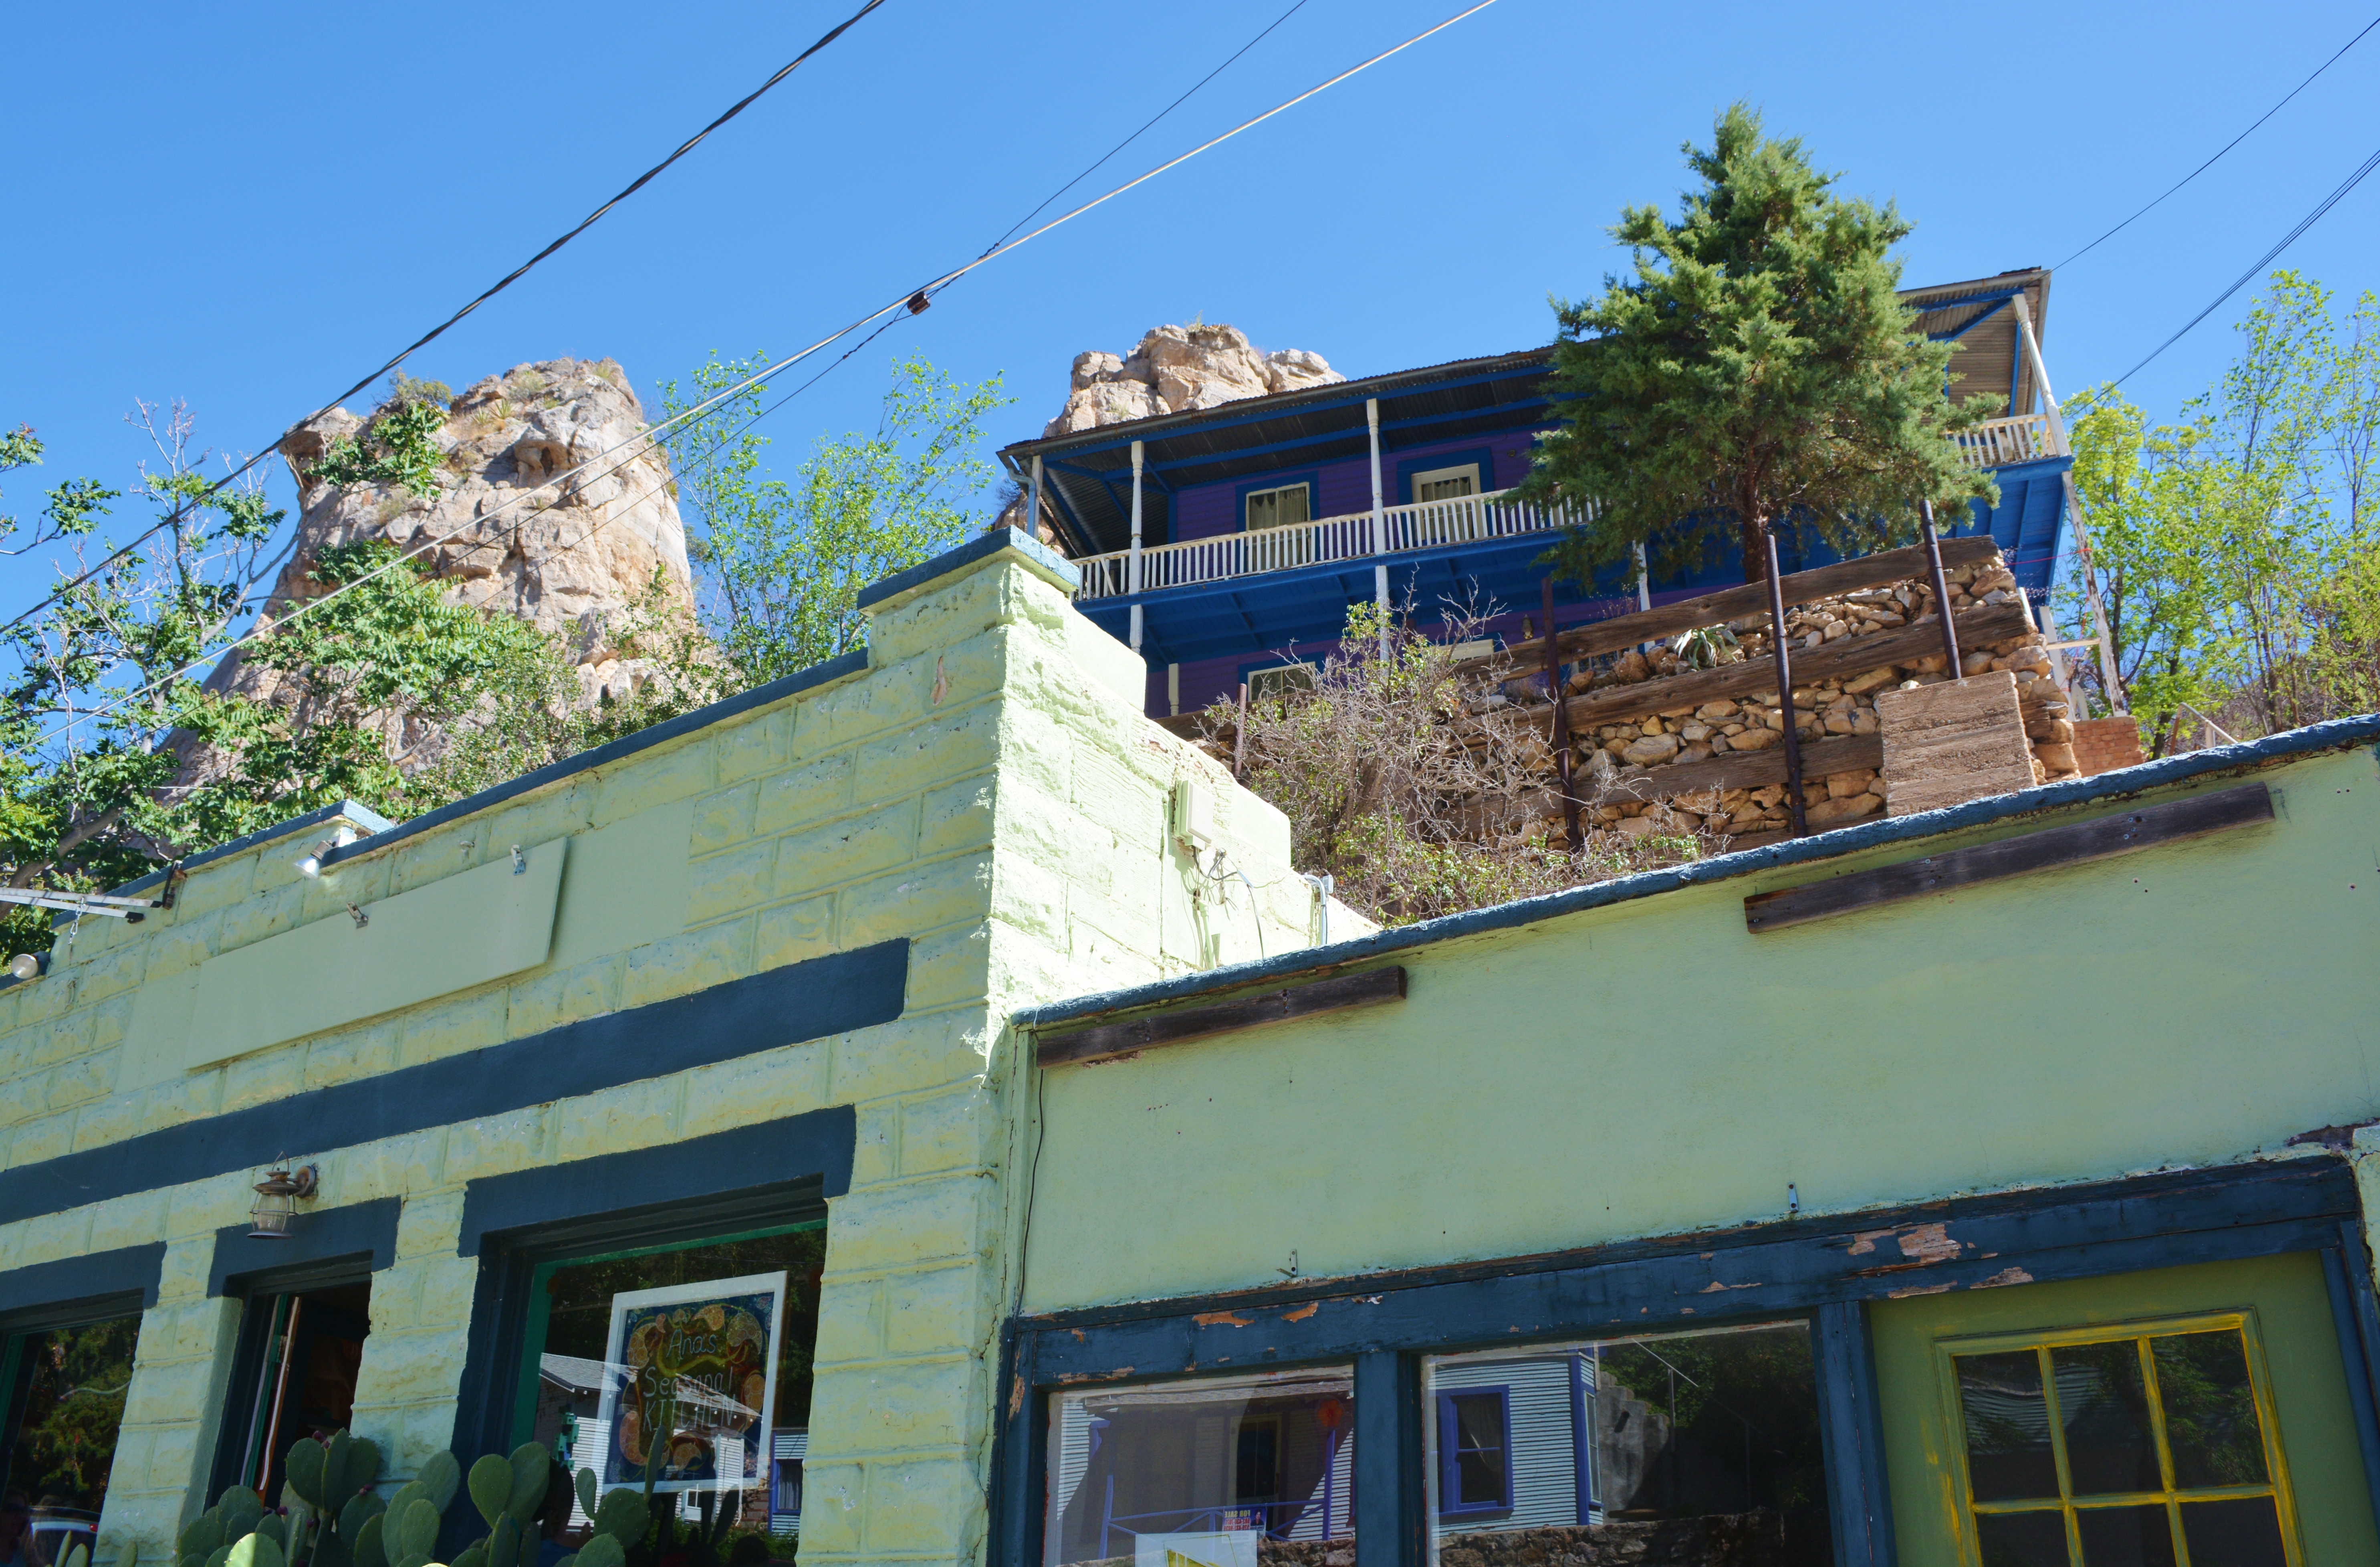 Houses on the Hill in Bisbee